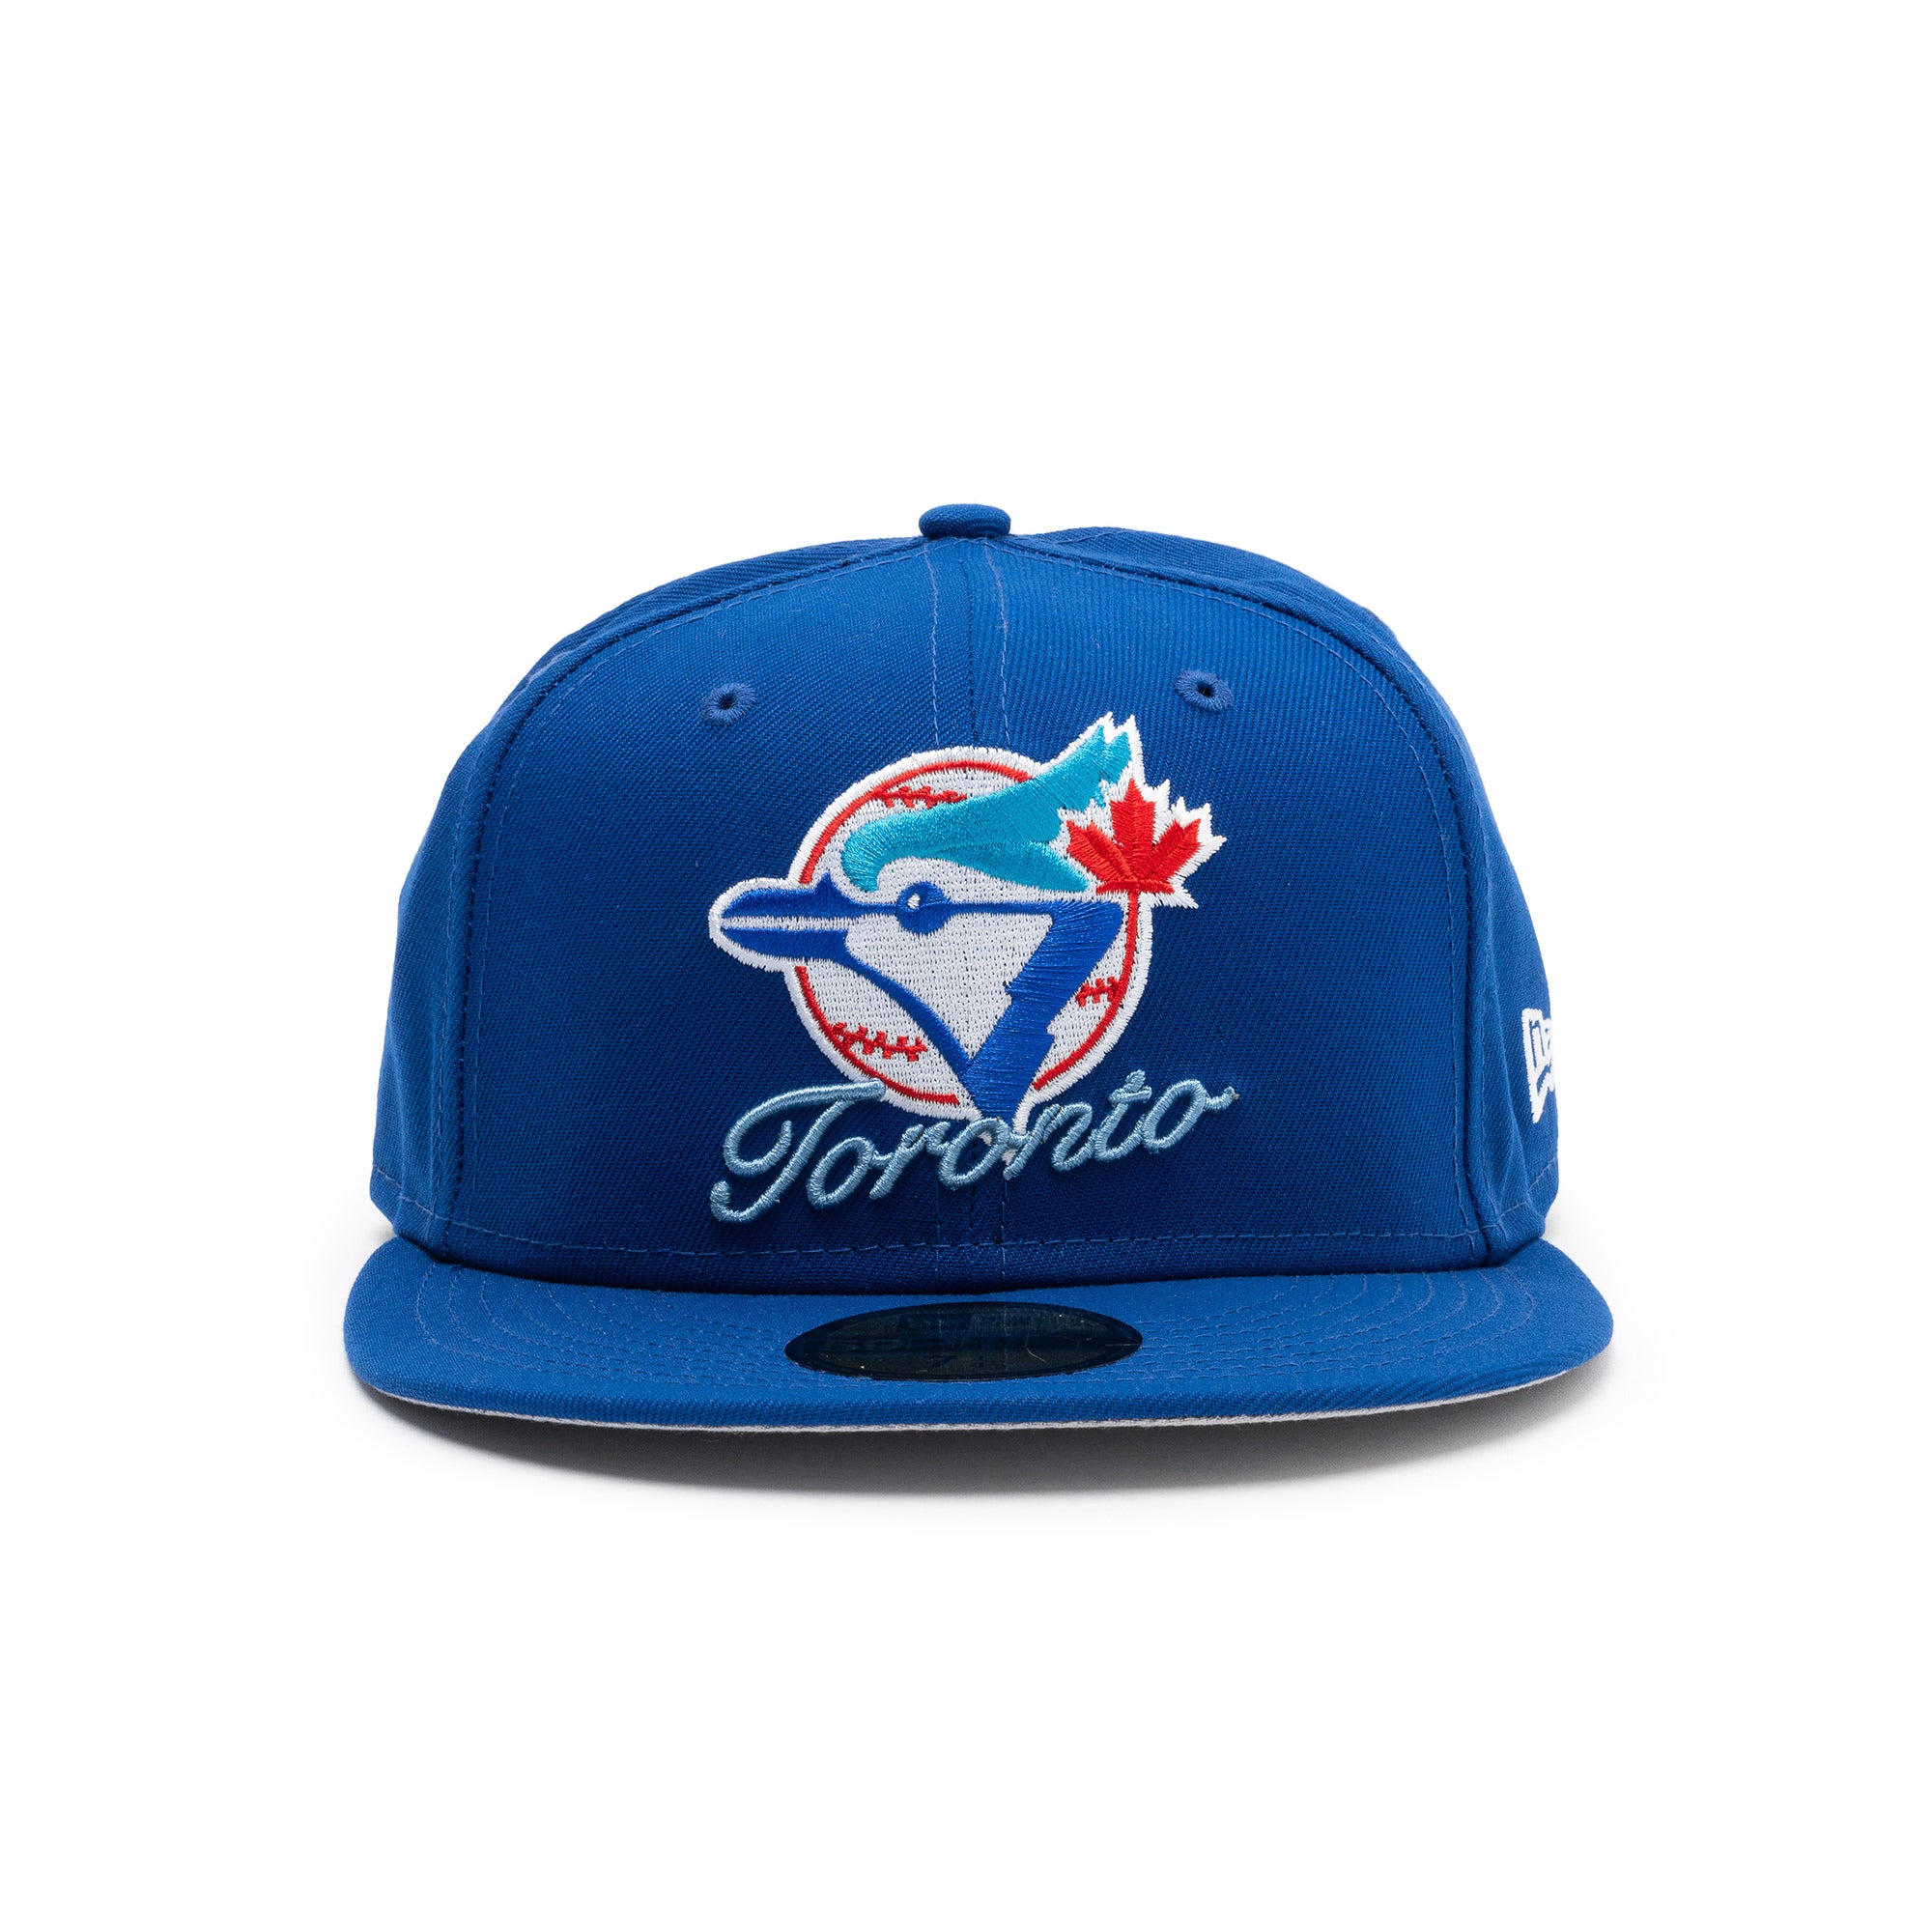 Blue Jays Dual Logo Fitted Blue